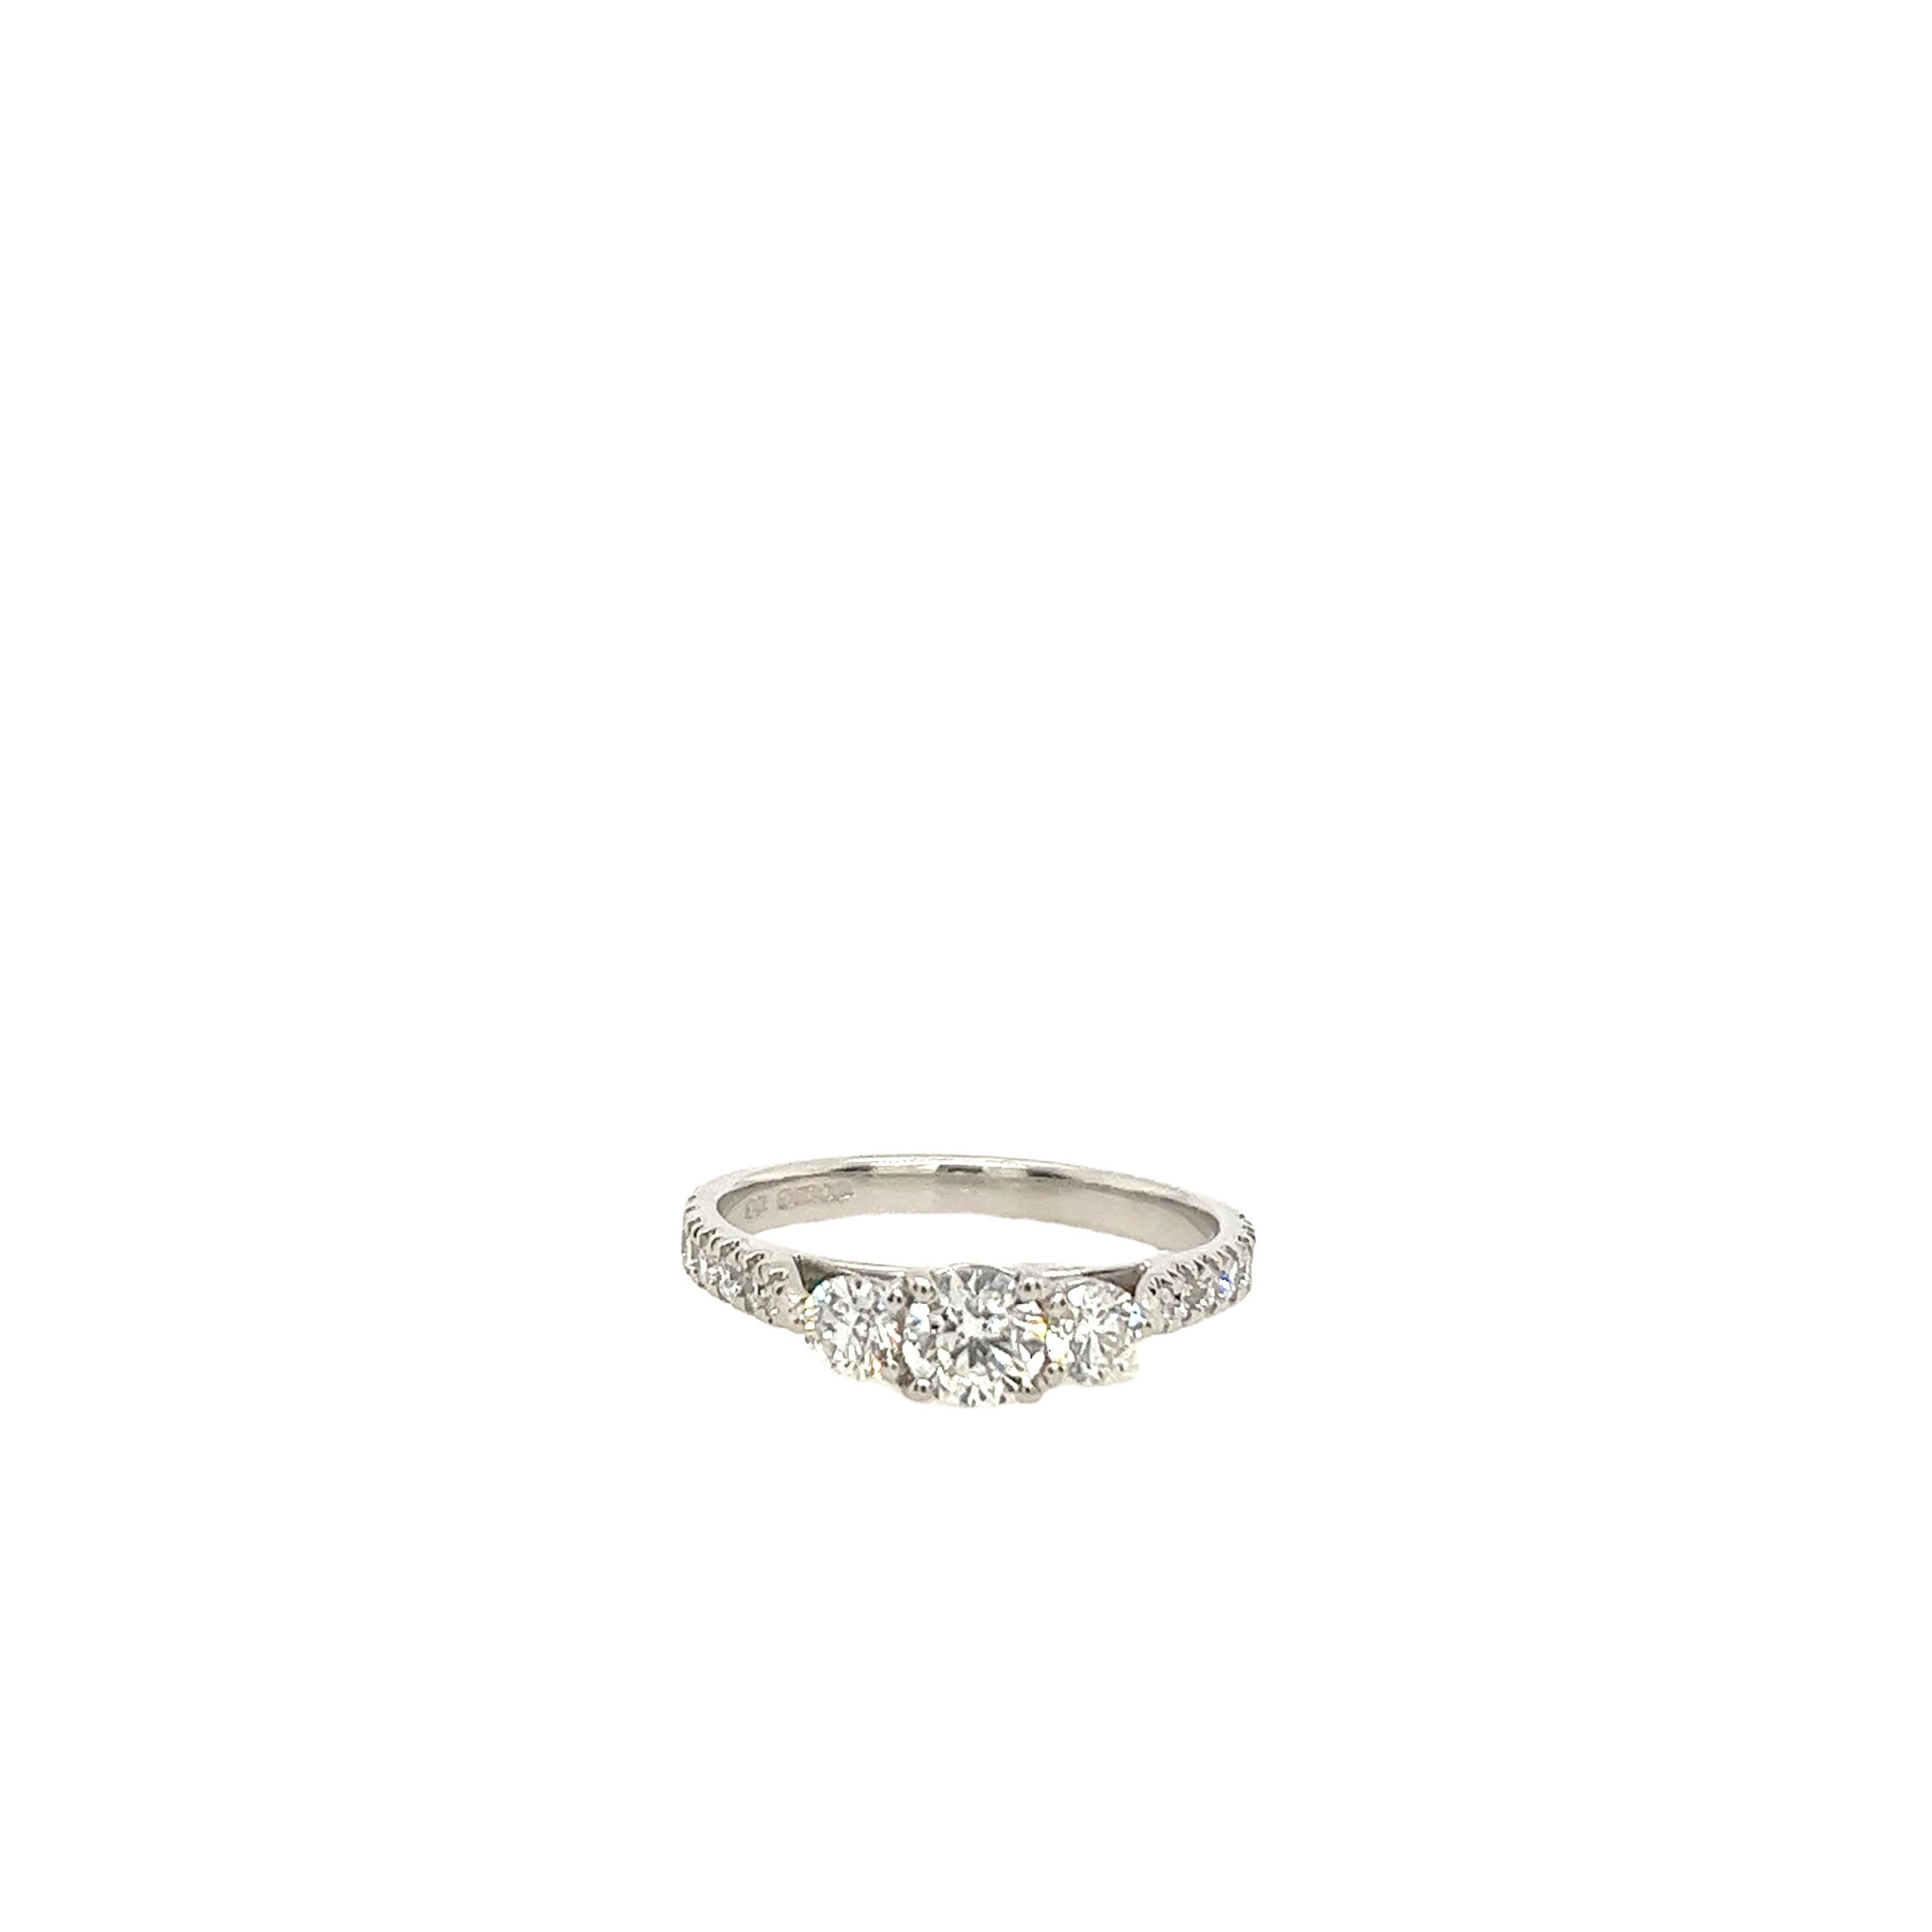 Women's 18ct White Gold 3 Stone Diamond Ring Set With 0.70carats of Diamonds For Sale